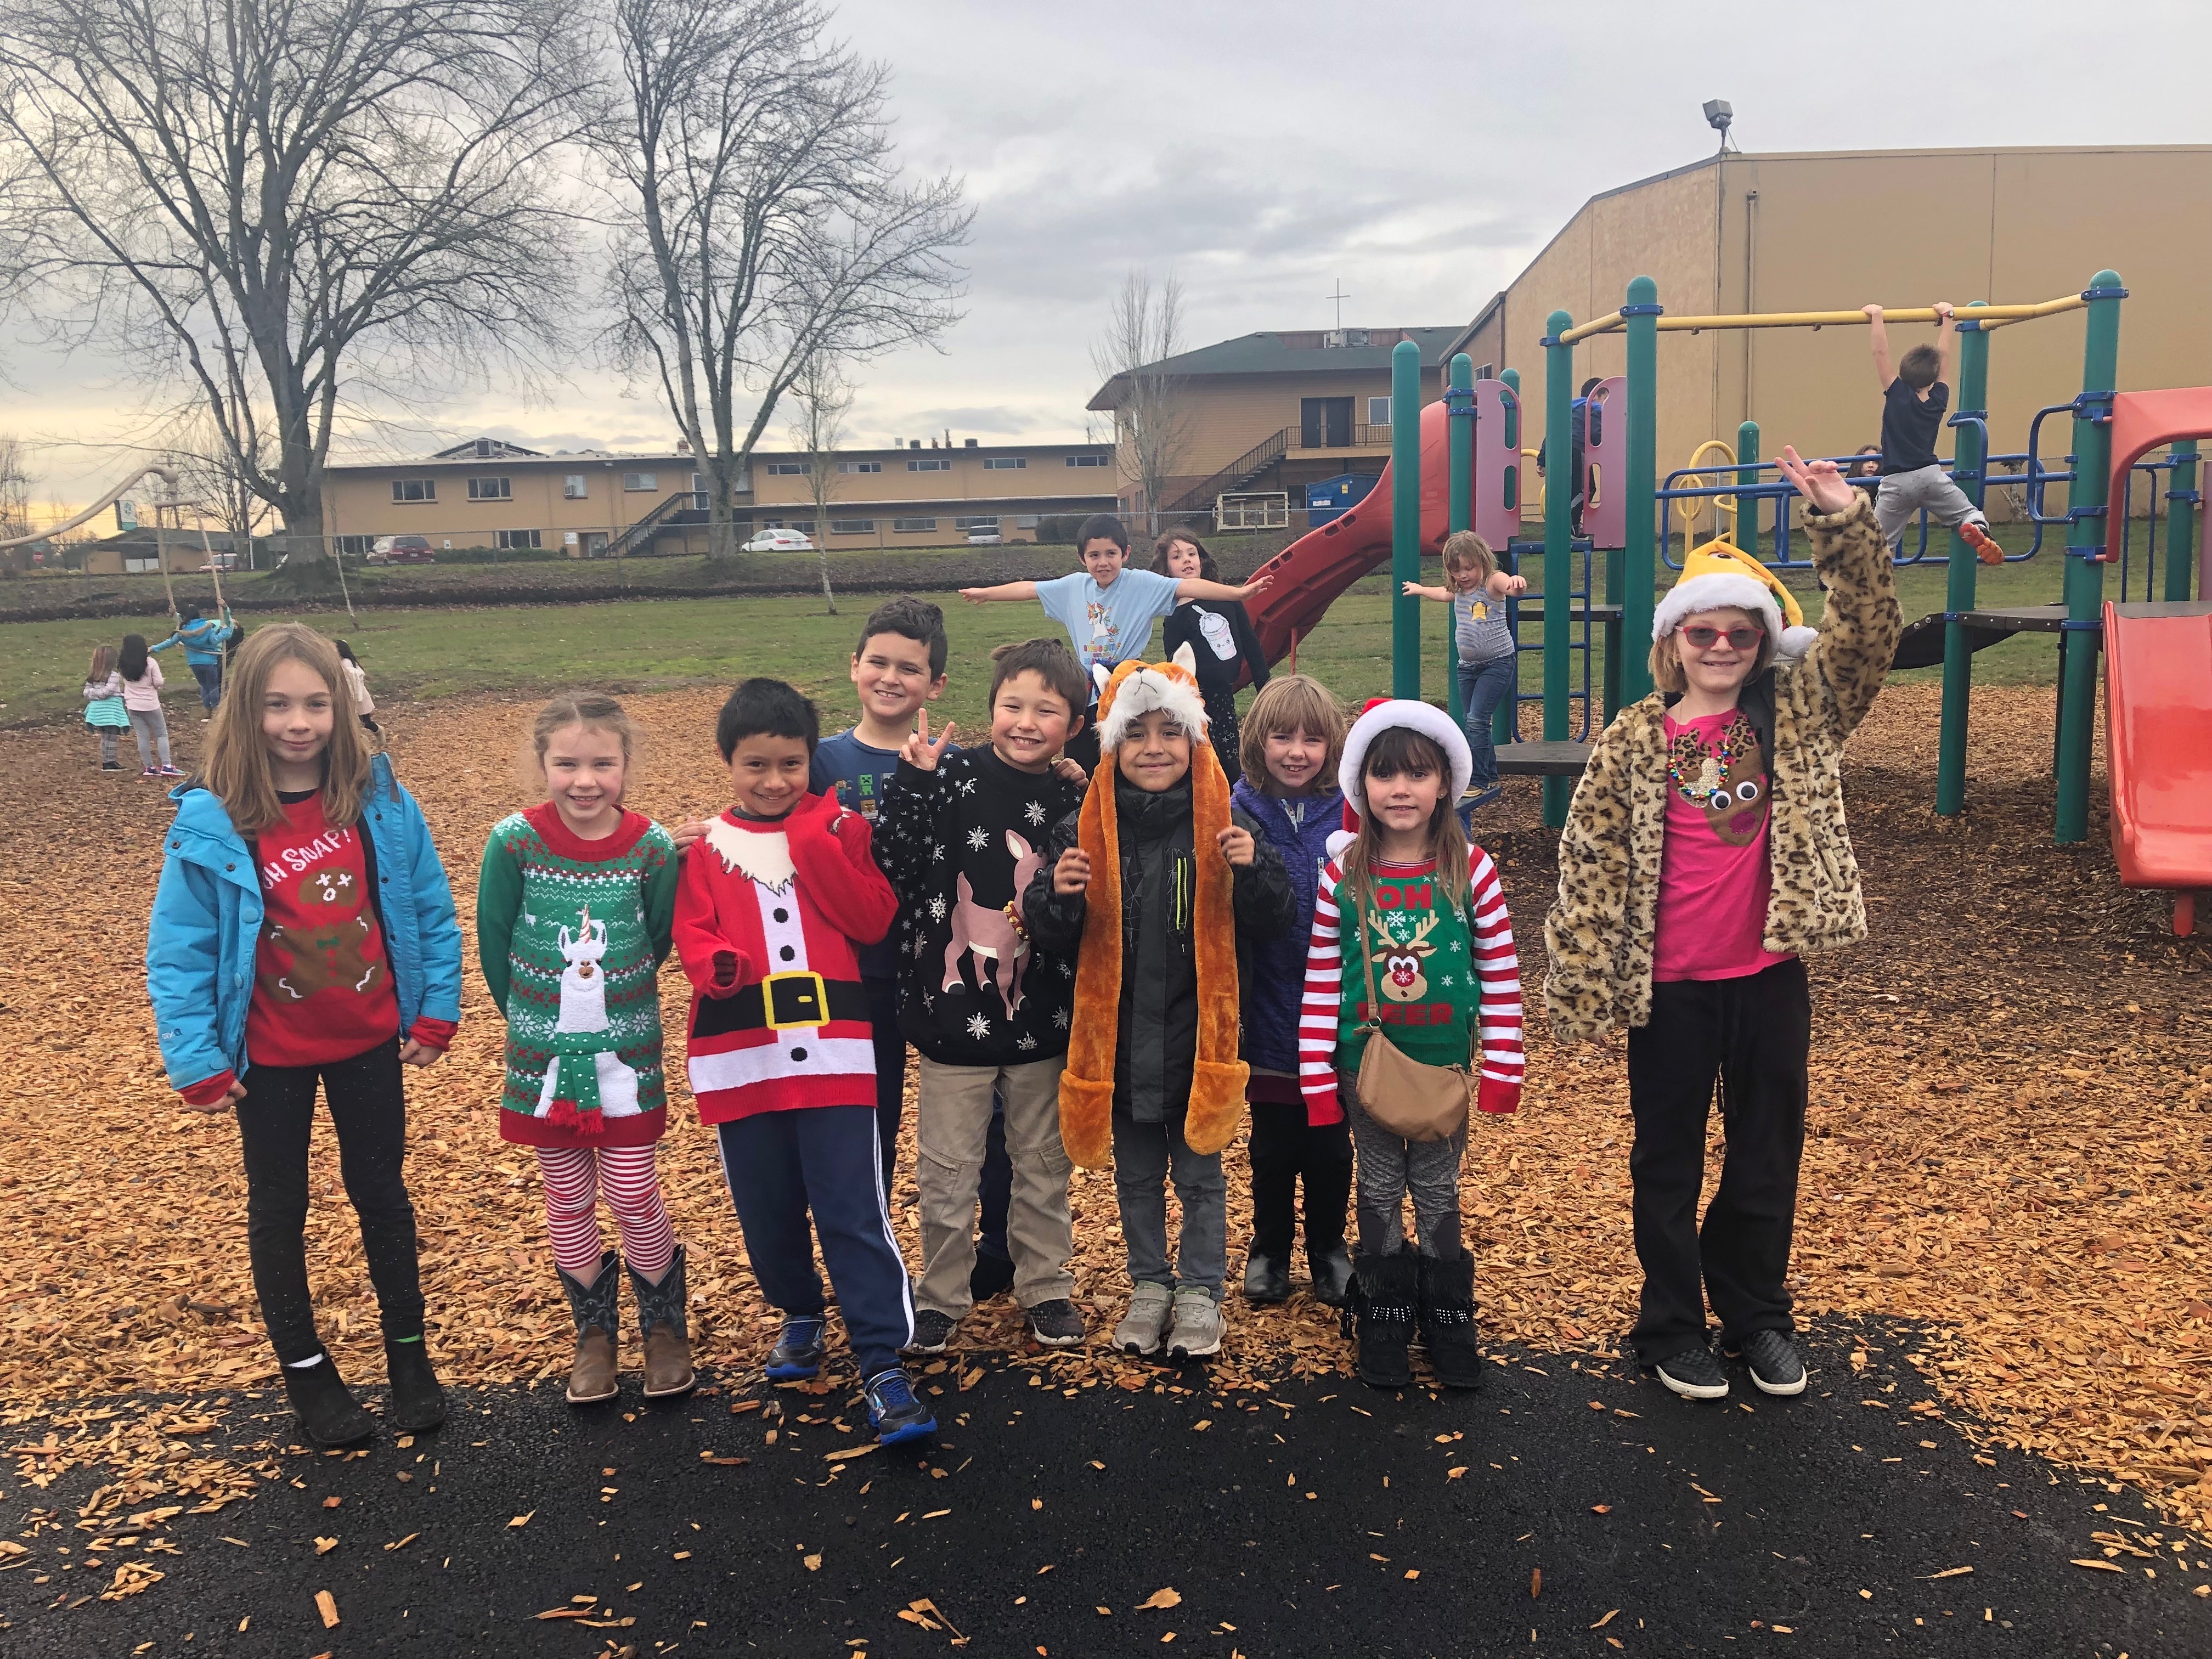 Students on playground in ugly sweaters